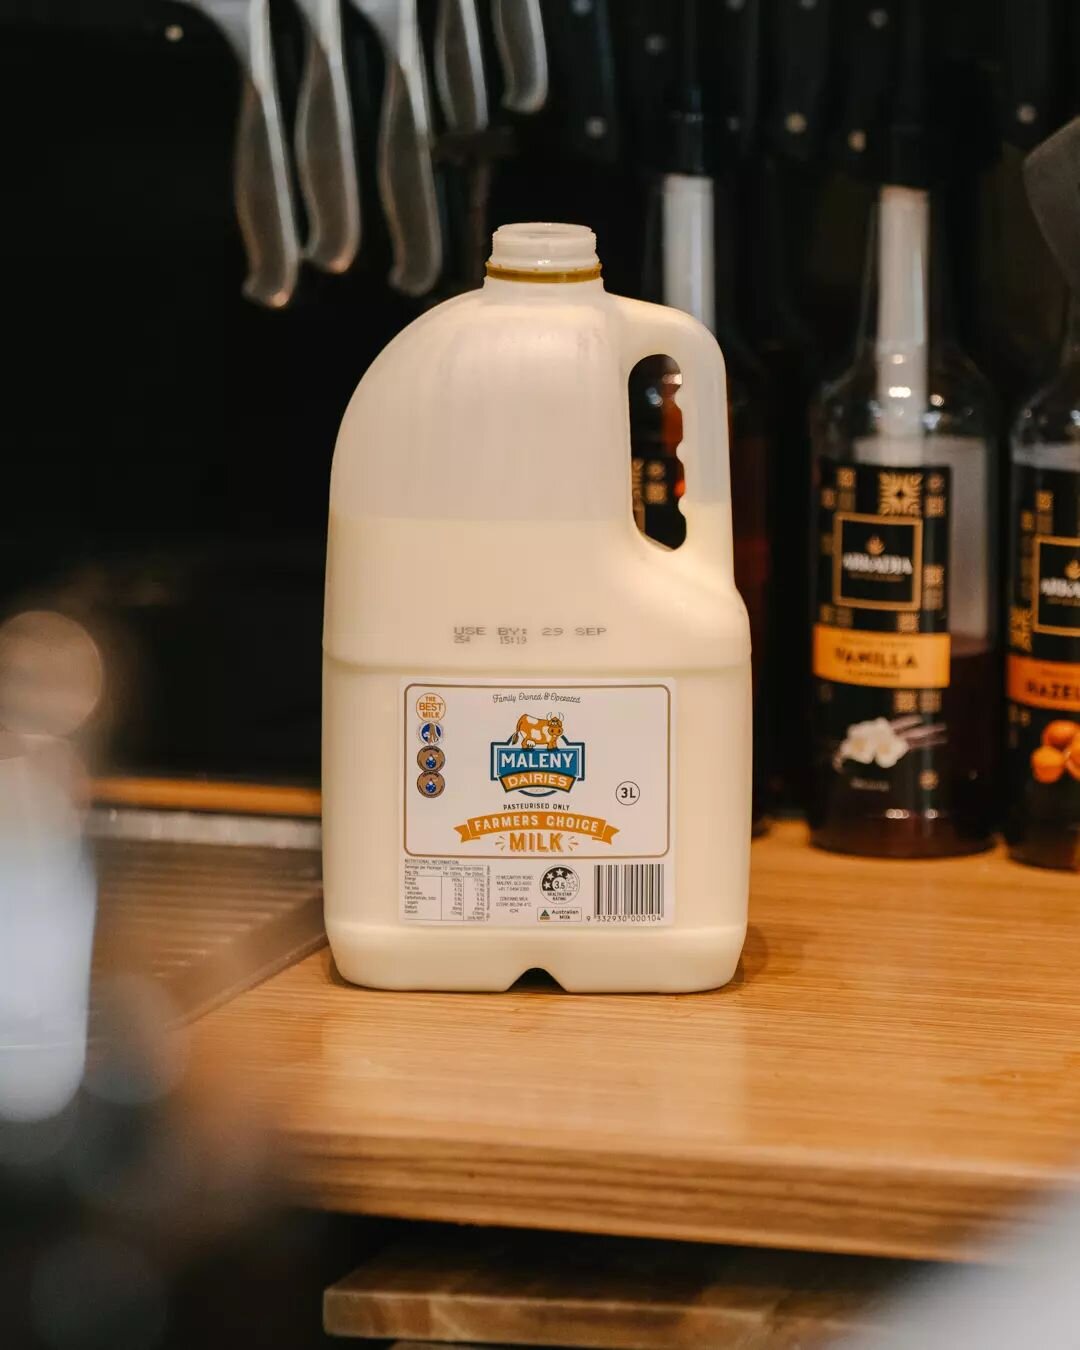 Proud to pour local! 🥛 Lucky to have award-winning Maleny Dairies just a stone's throw away. Freshest milk in our brews while backing our amazing local farmers and businesses. That&rsquo;s a win-win! 

#SupportLocal #MalenyDairies #FarmFreshMilk #Lo